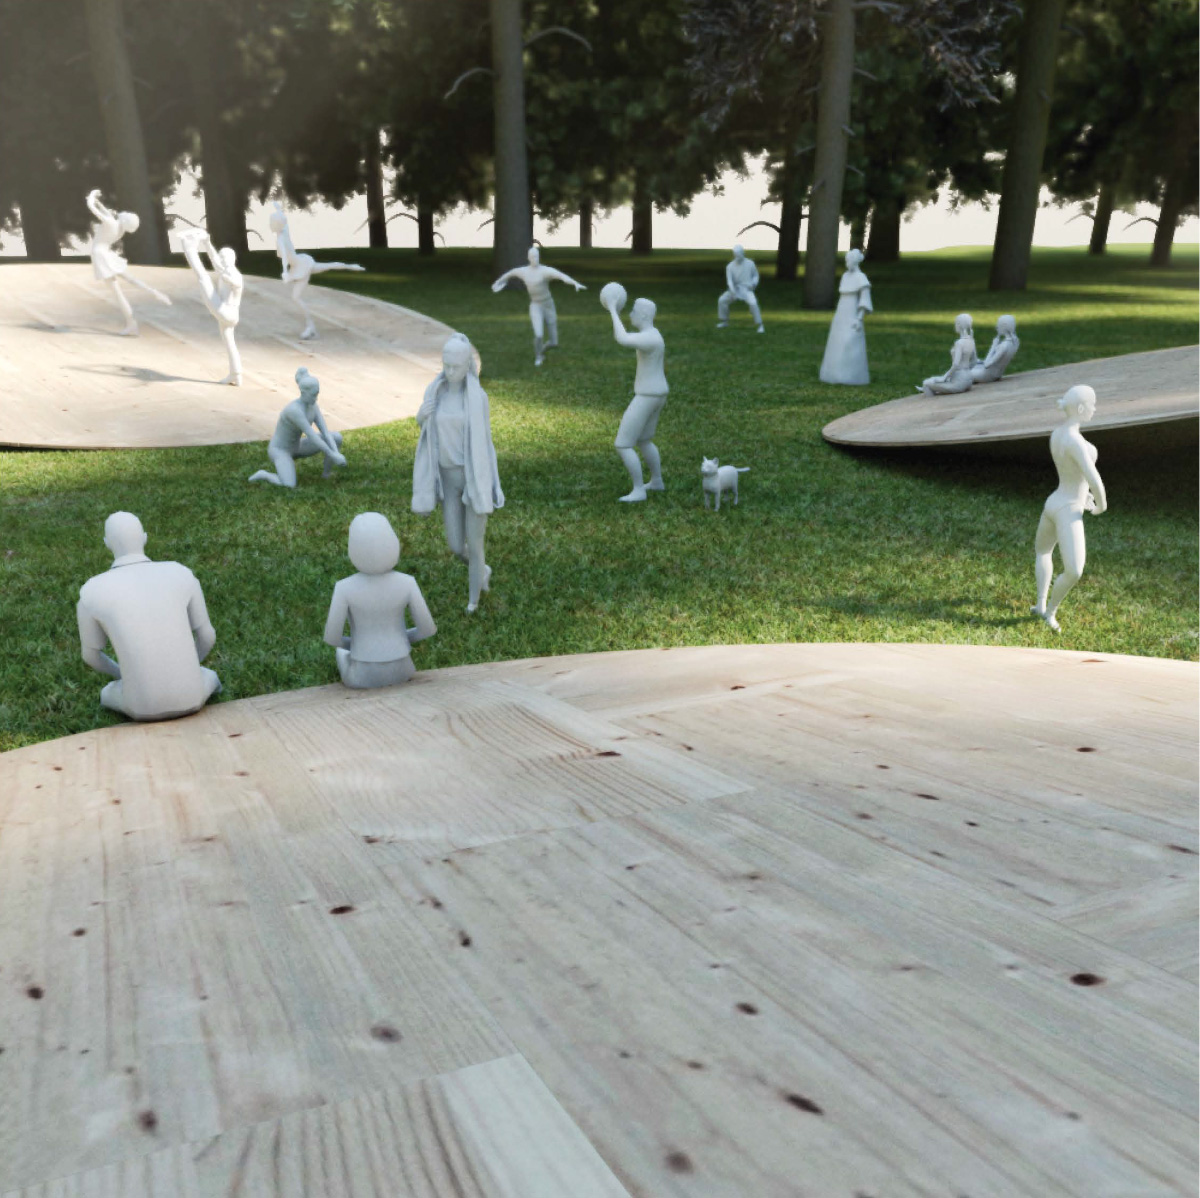 Rendering of people on a wooden disc